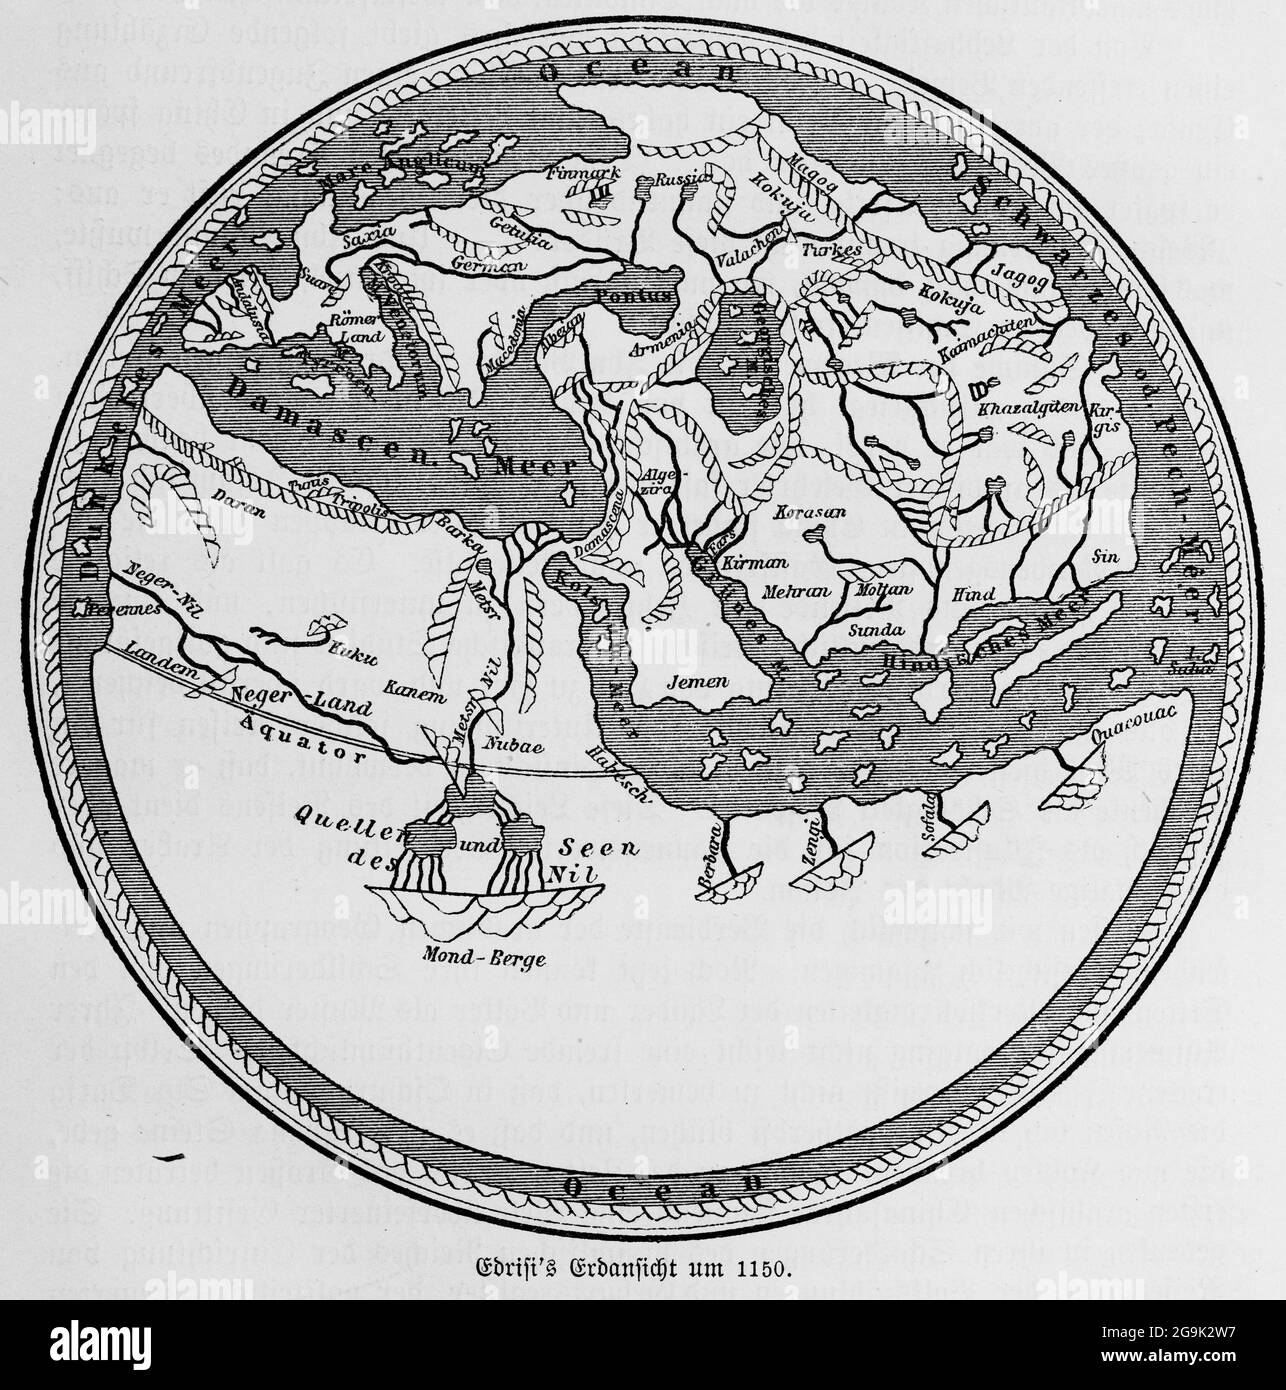 Earth view of the Nubian geographer Edrisi or al-Idrisi from the 12th century, historical world map, illustration from 1881 Stock Photo